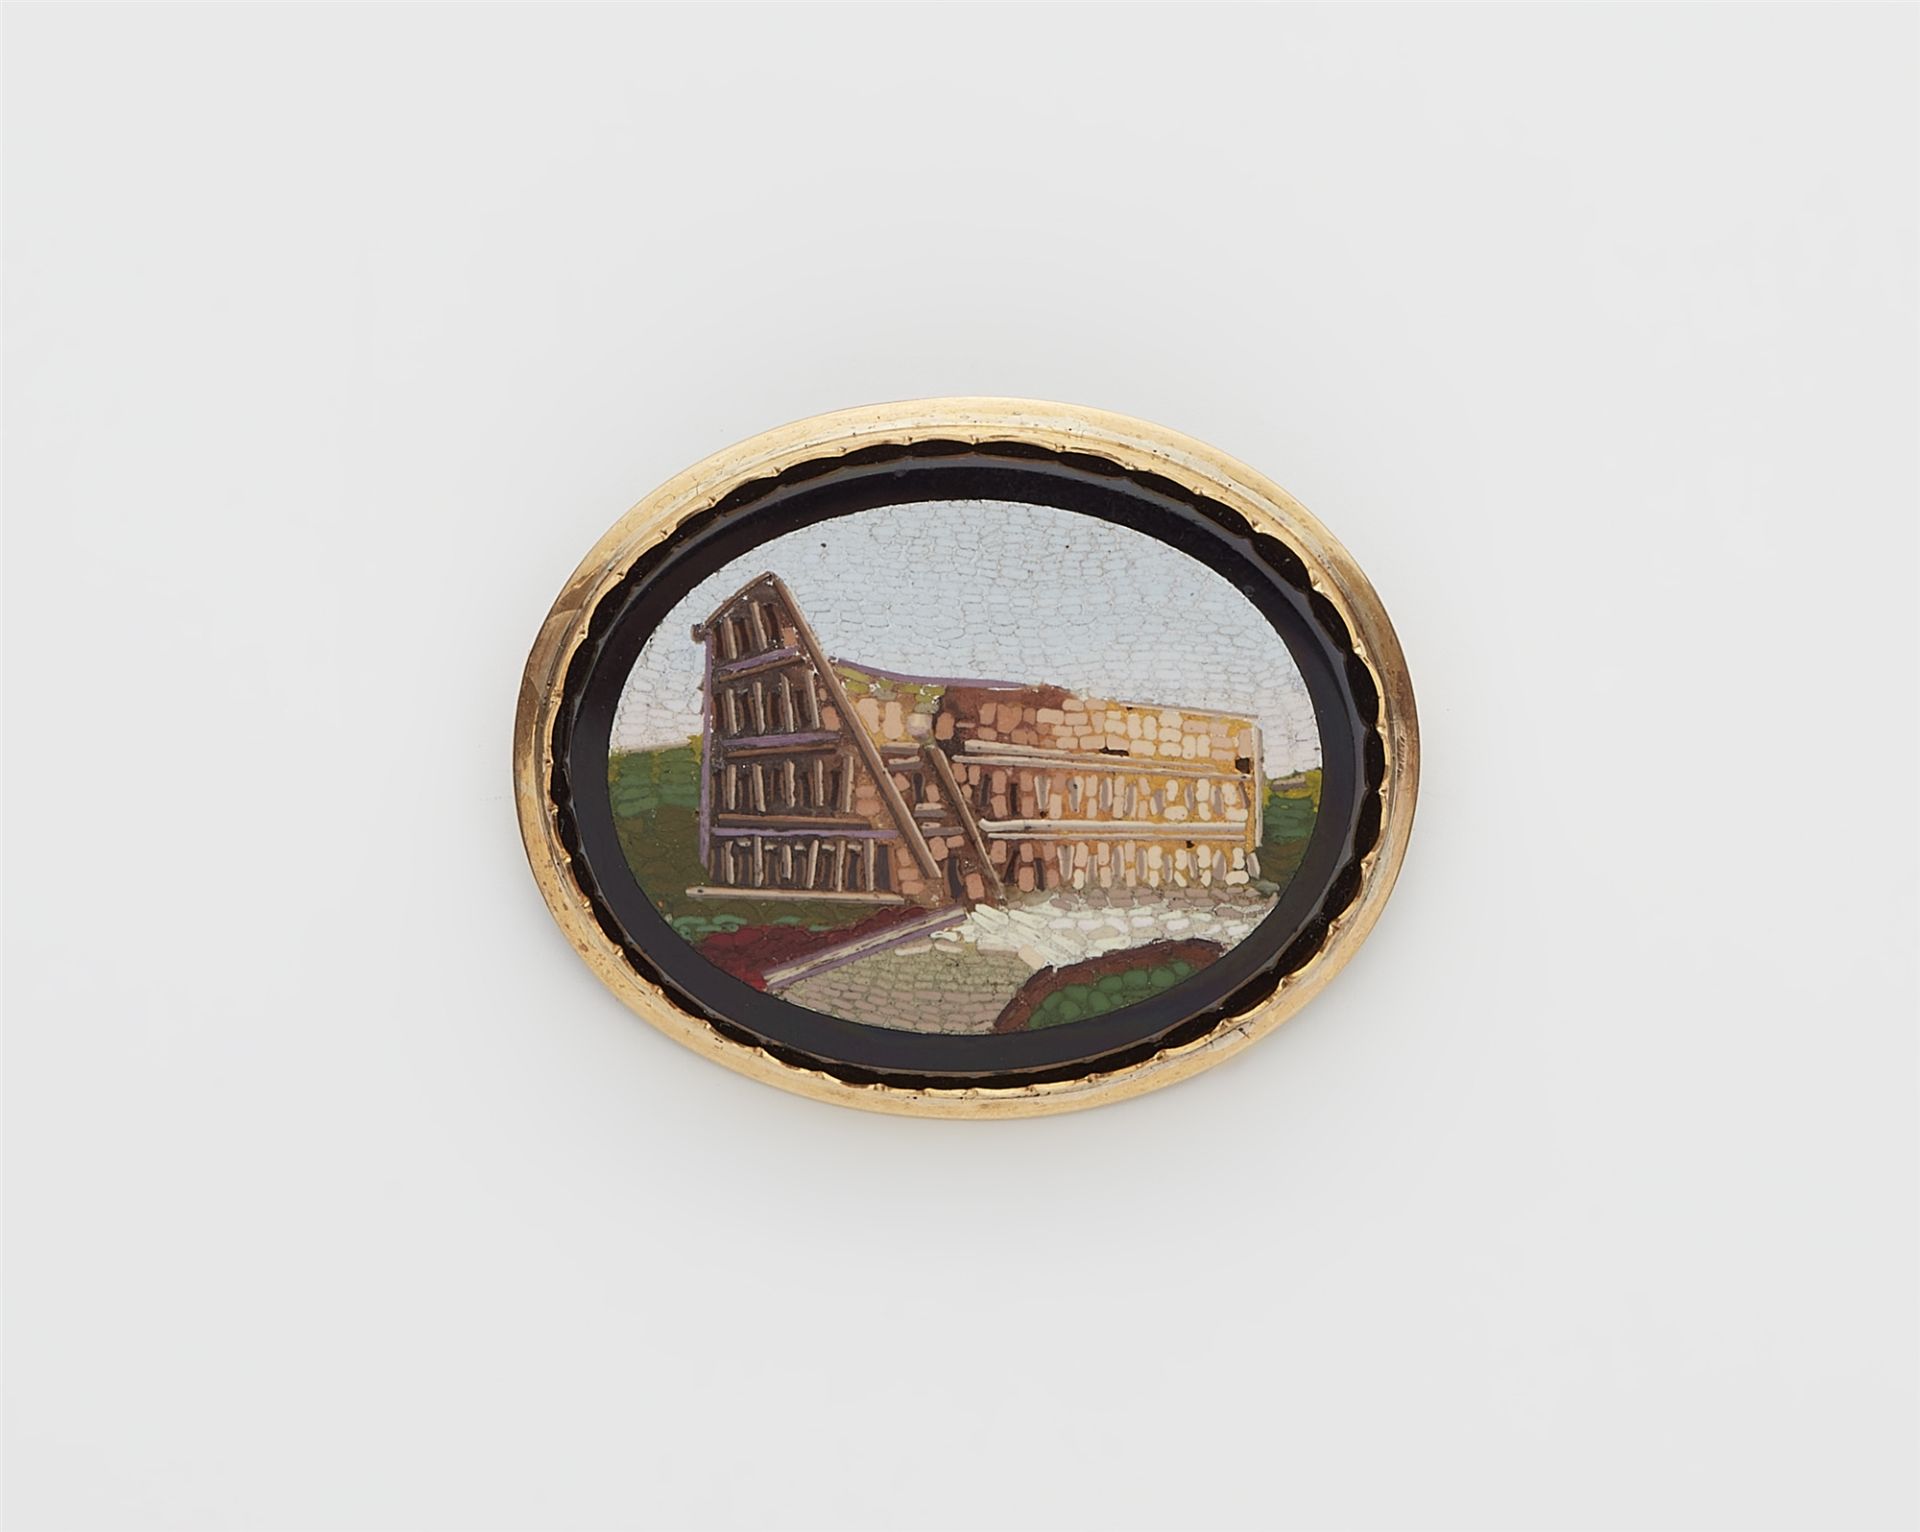 A 14k gold and Roman micromosaic souvenir brooch depicting the Colosseum.